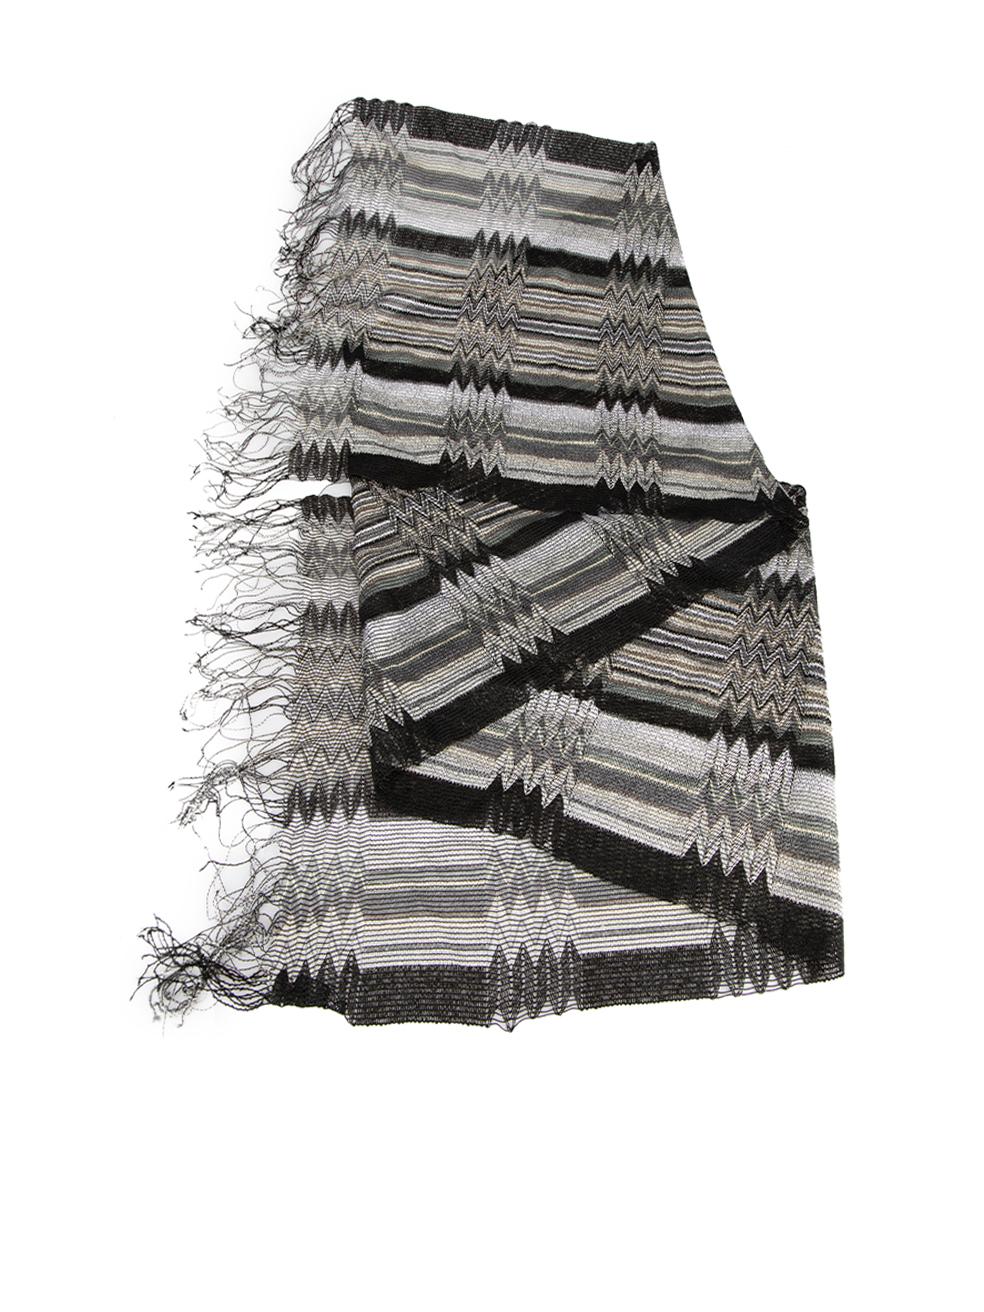 CONDITION is Very good. Hardly any visible wear to scarf is evident on this used Missoni designer resale item. 



Details


Grey

Viscose

Knit scarf

Striped pattern

Fringed hemline





Made in Italy



Composition

100% Viscose



Care